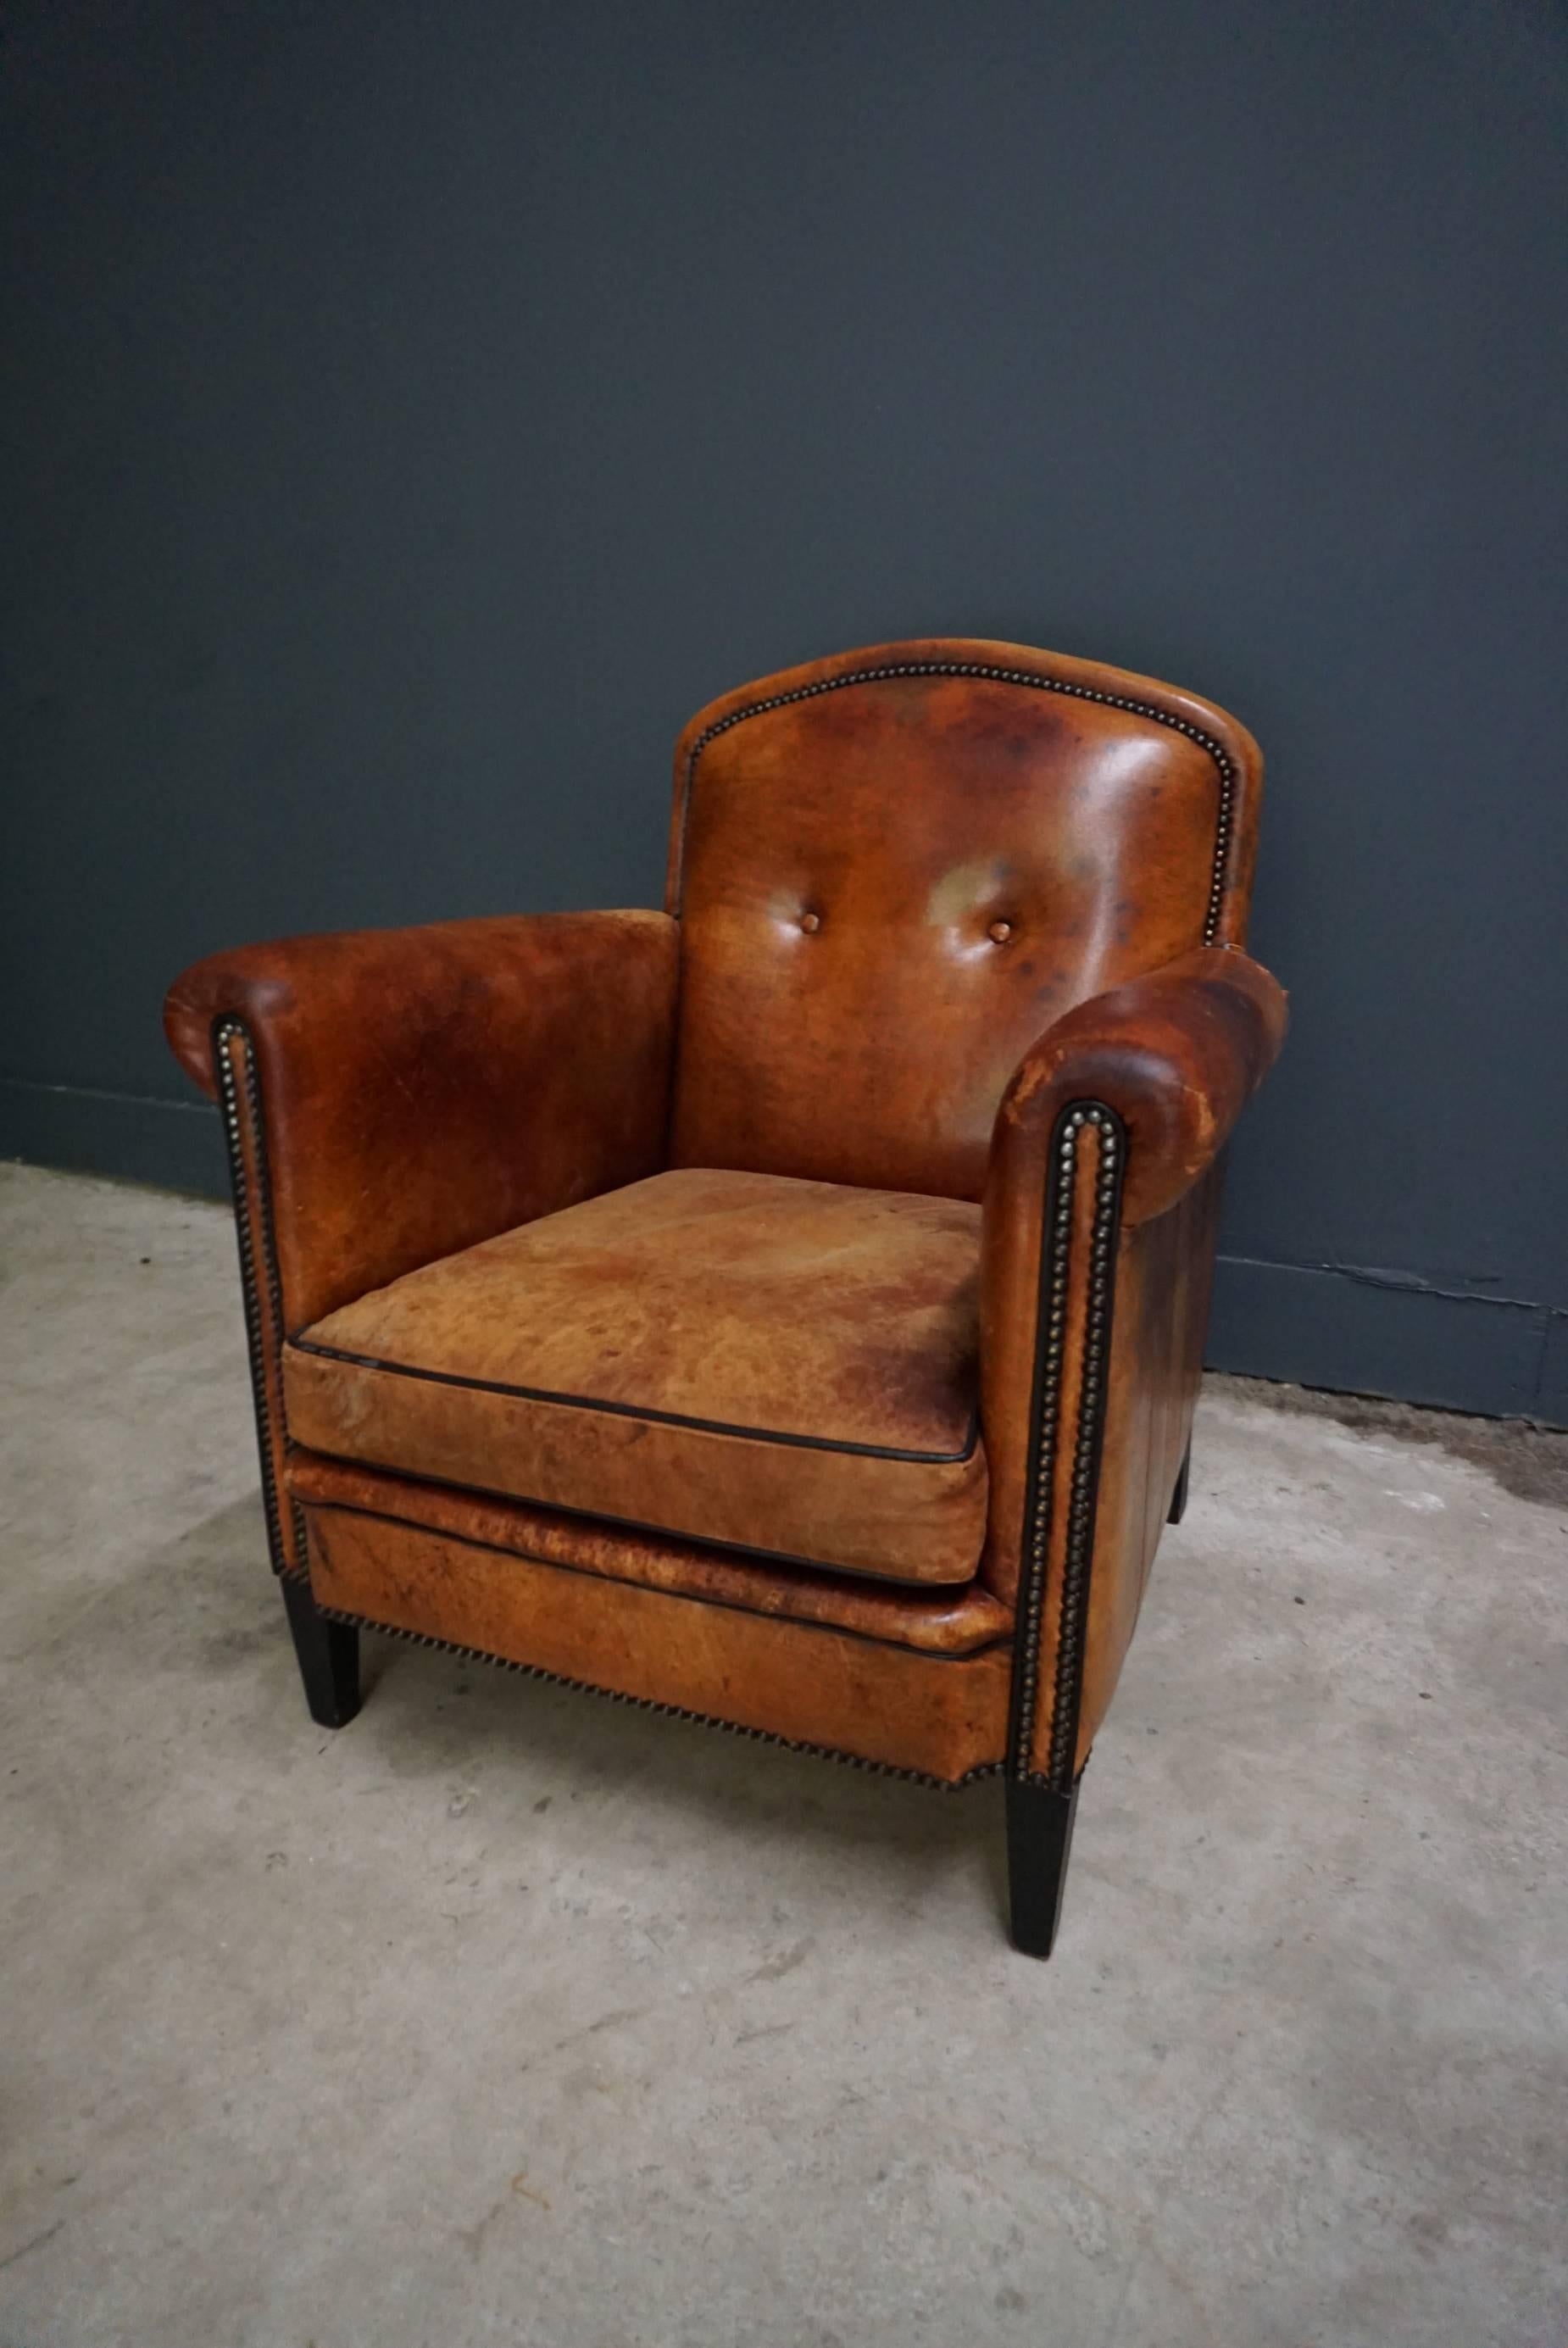 This vintage club chair is upholstered with cognac-colored leather and features metal pins and wooden legs.